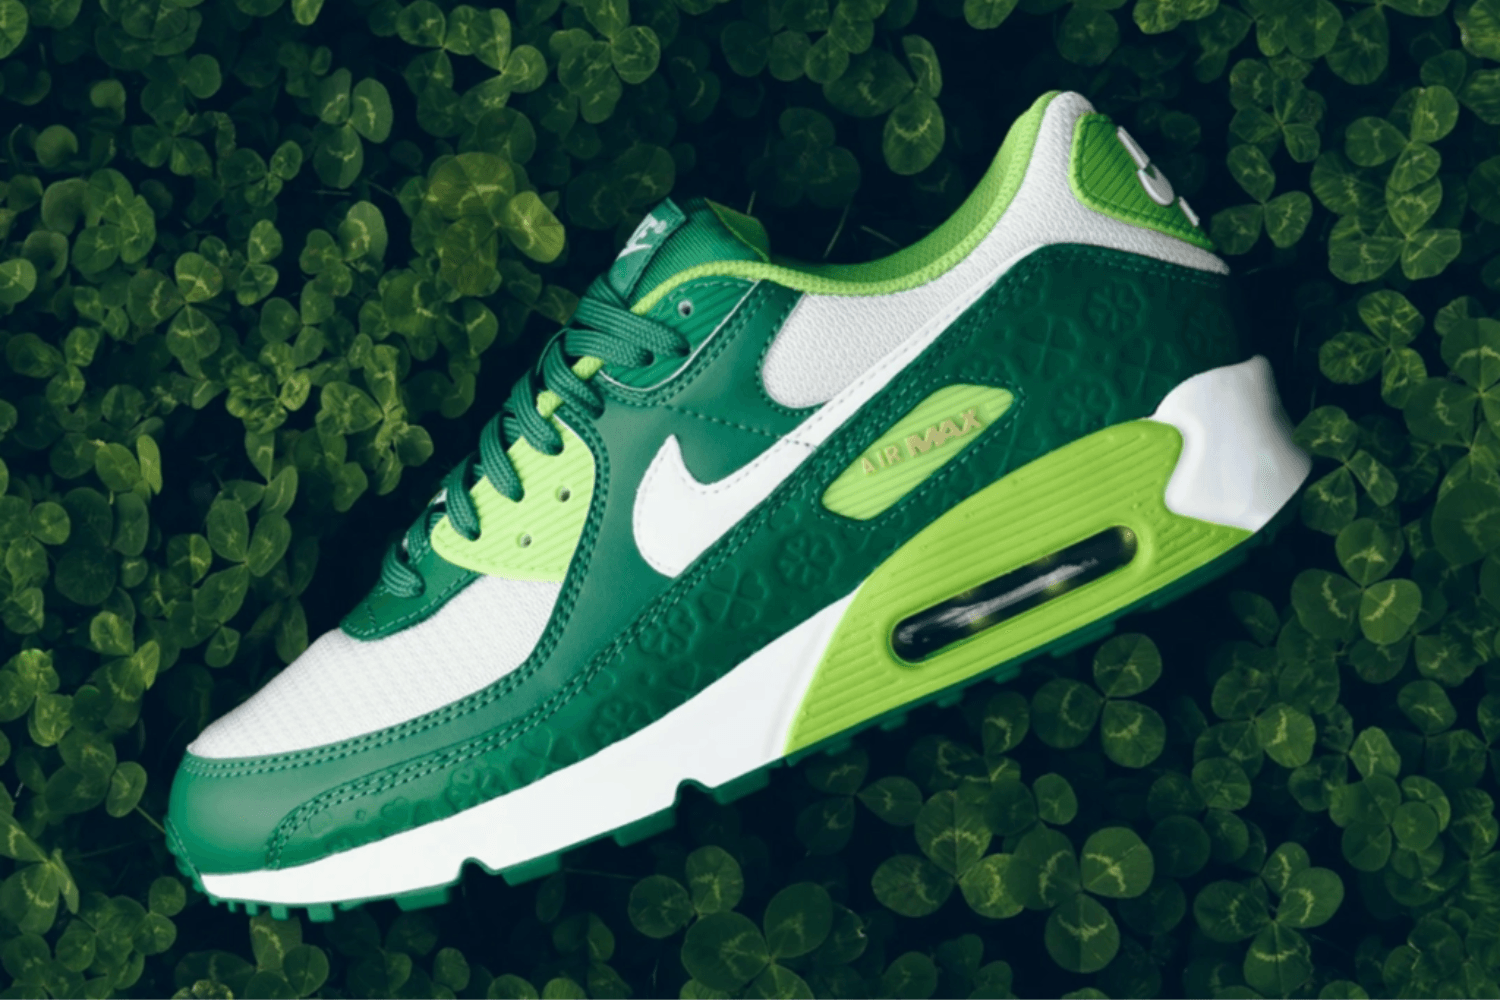 Saint Patrick's Day sneakers at StockX